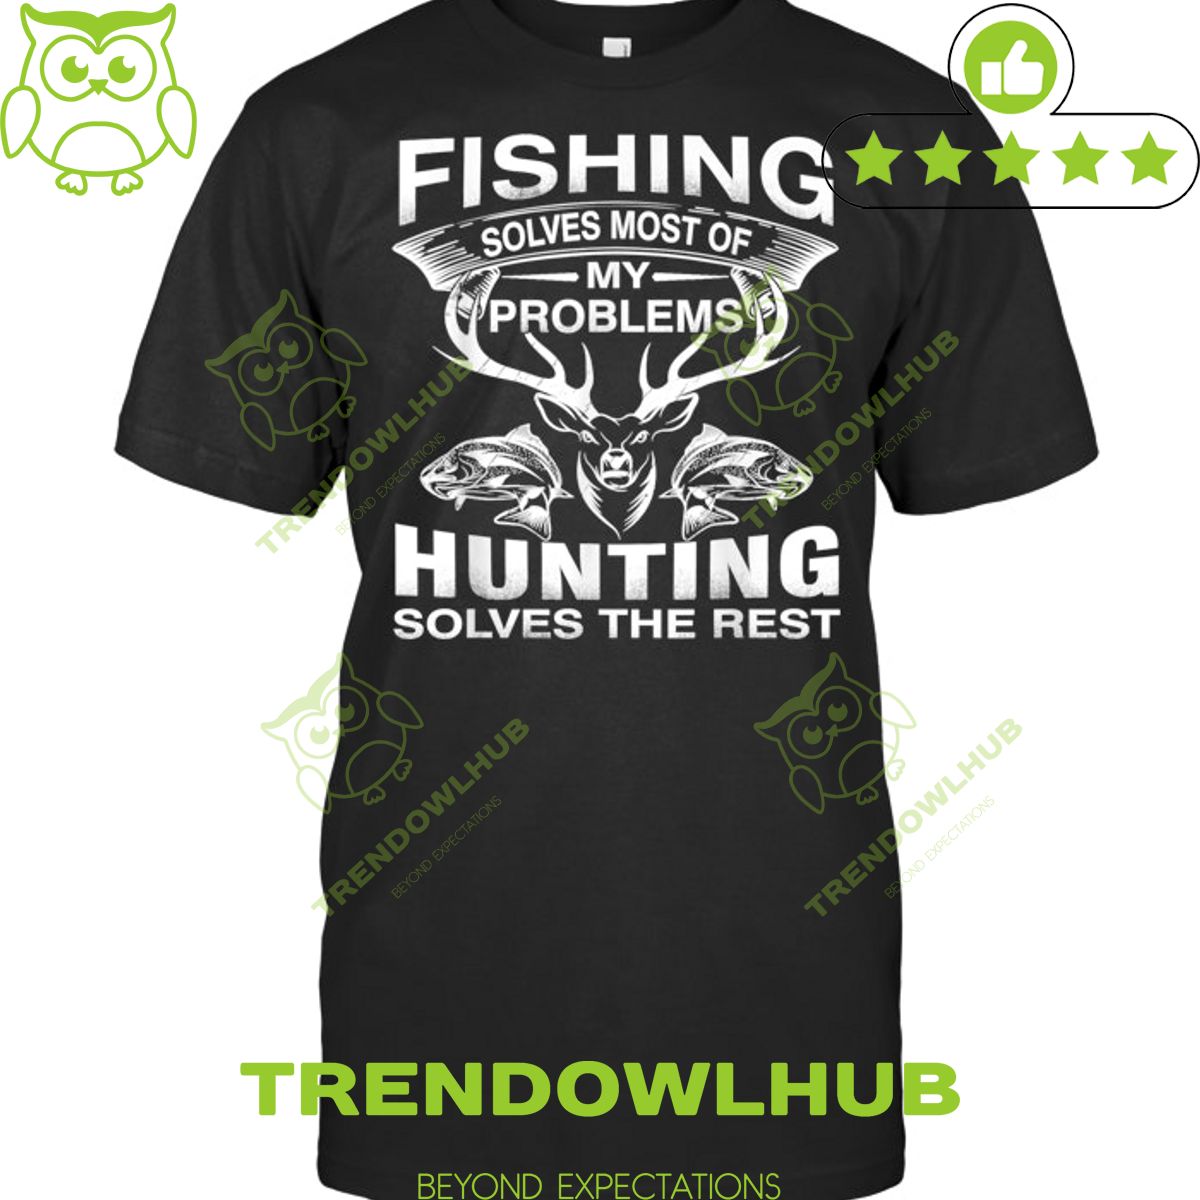 Fishing Solves Most of my problems Hunting solves the rest t shirt